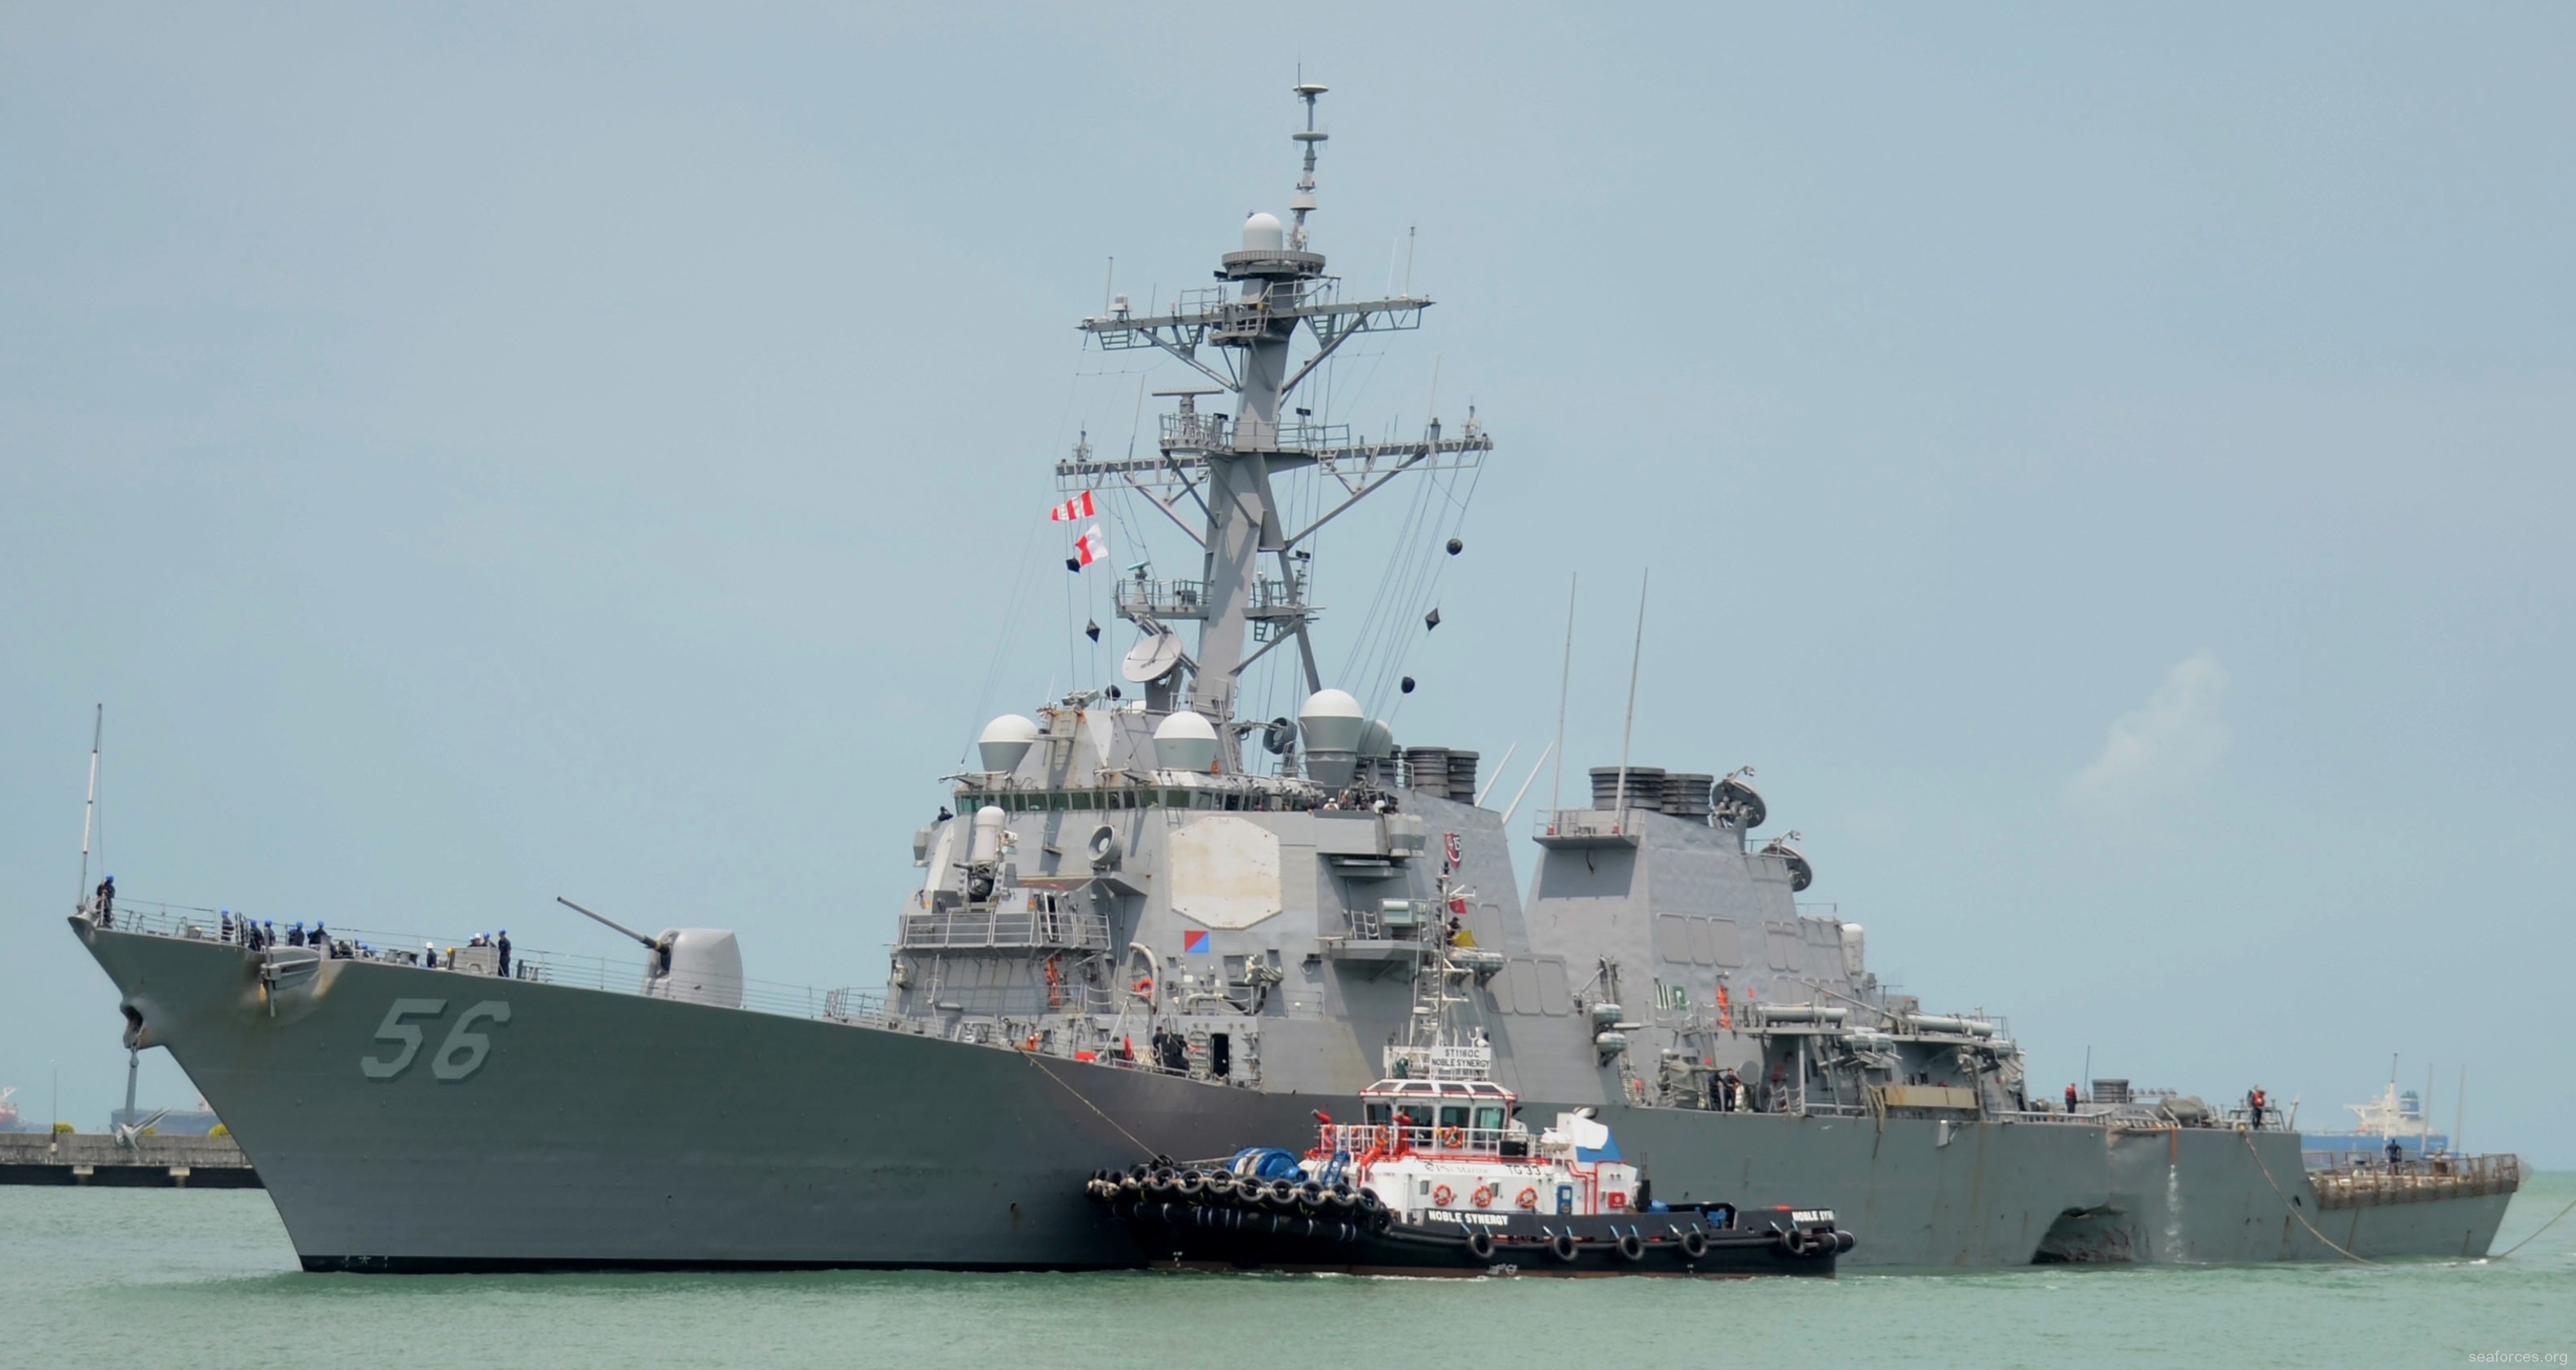 uss john s. mccain ddg-56 arleigh burke class destroyer us navy 04 damage after collision straits of malacca